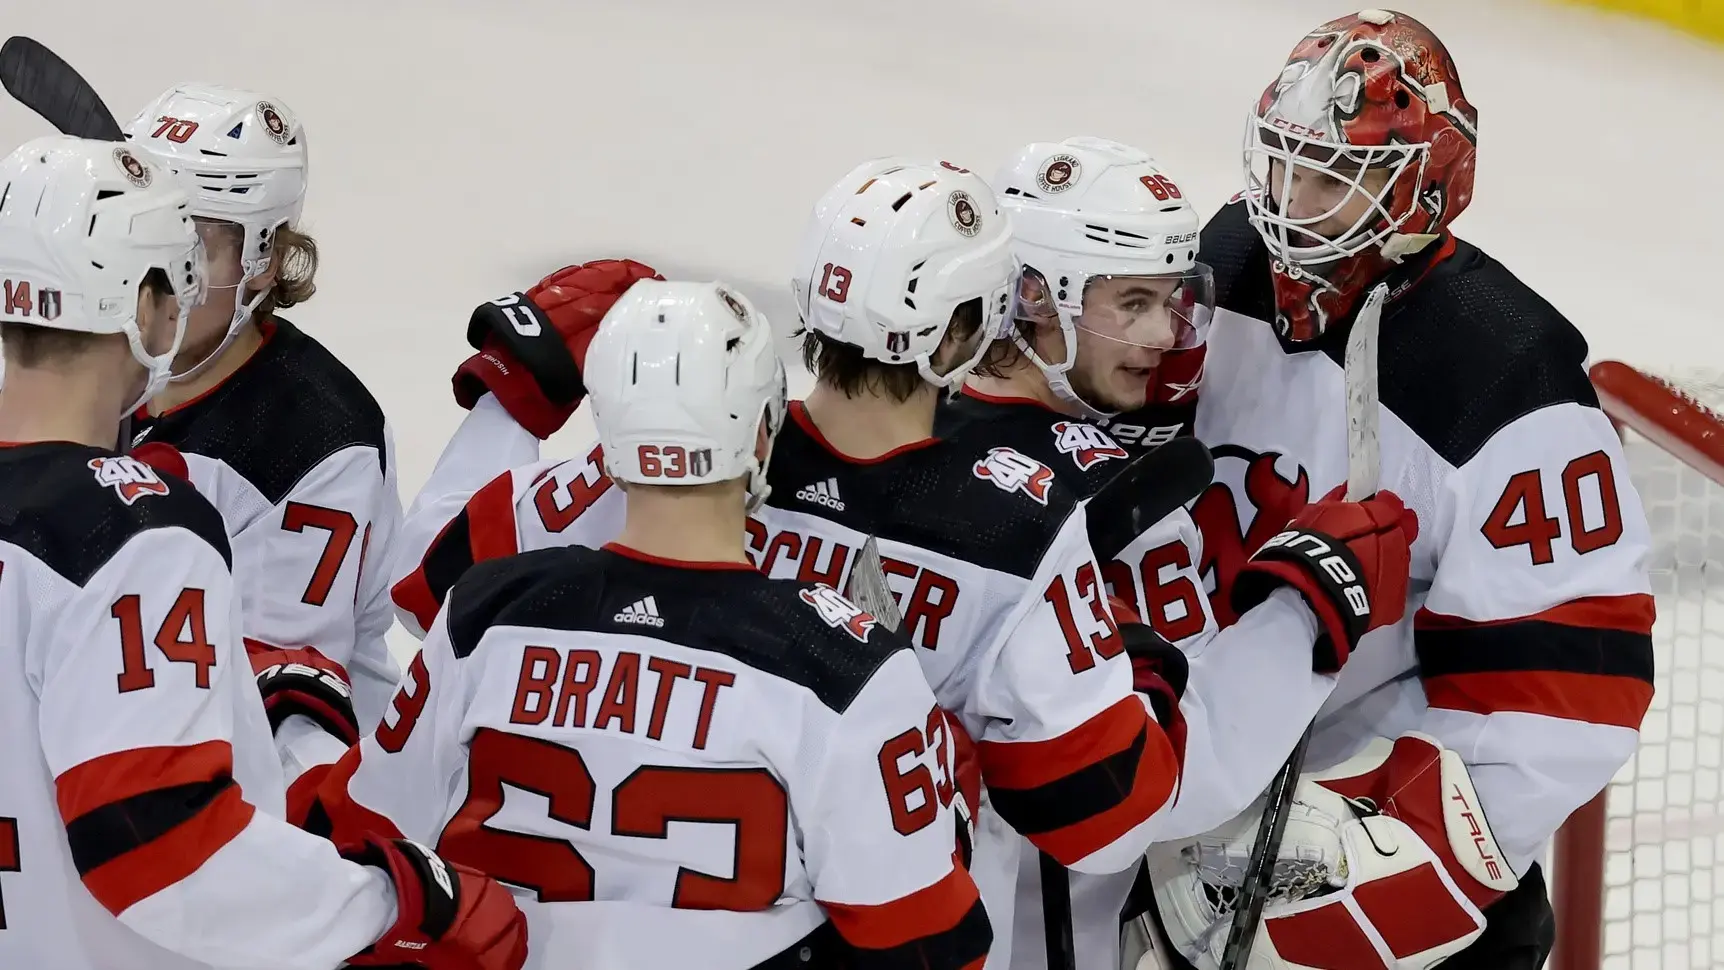 Apr 24, 2023; New York, New York, USA; New Jersey Devils goaltender Akira Schmid (40) celebrates with center Jack Hughes (86) and center Nico Hischier (13) after defeating the New York Rangers in game four of the first round of the 2023 Stanley Cup Playoffs at Madison Square Garden / Brad Penner-USA TODAY Sports